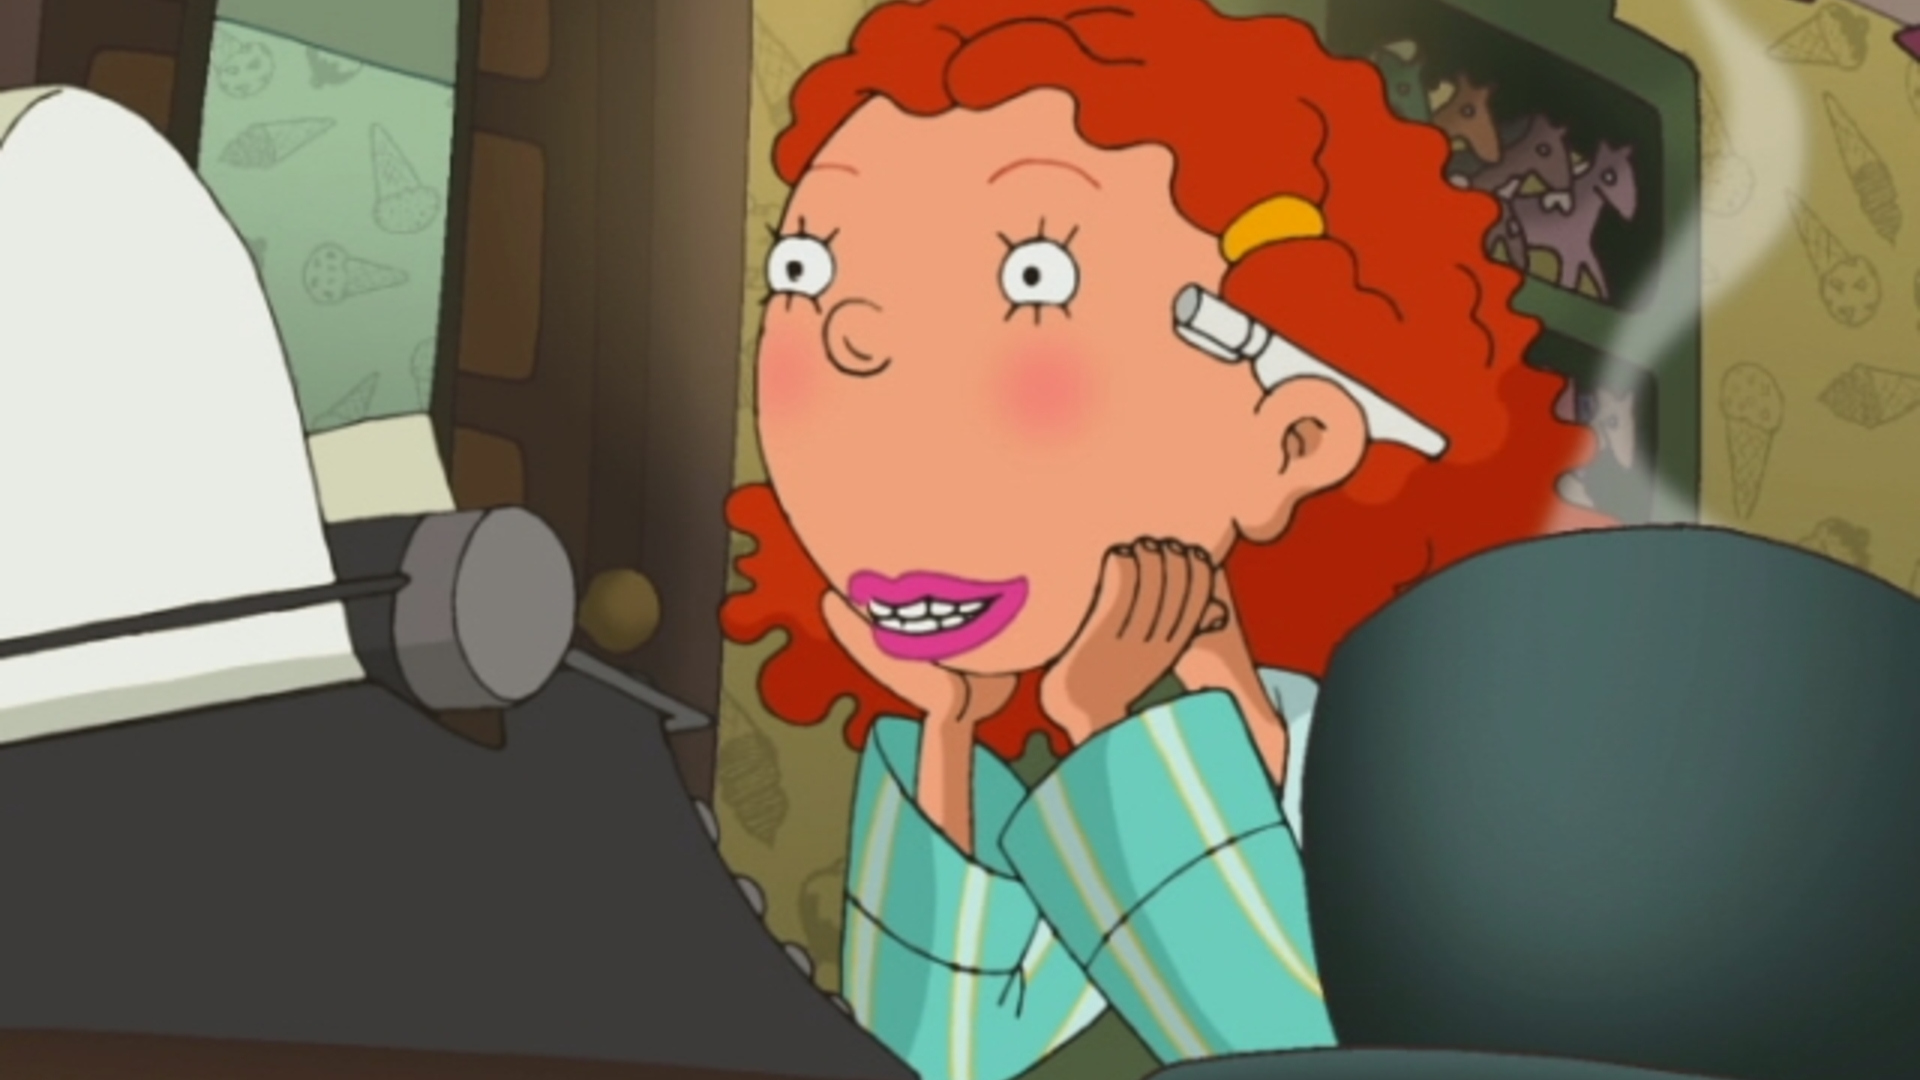 Watch As Told By Ginger Season 2 Episode 17 And She Was Gone Full Show On Paramount Plus